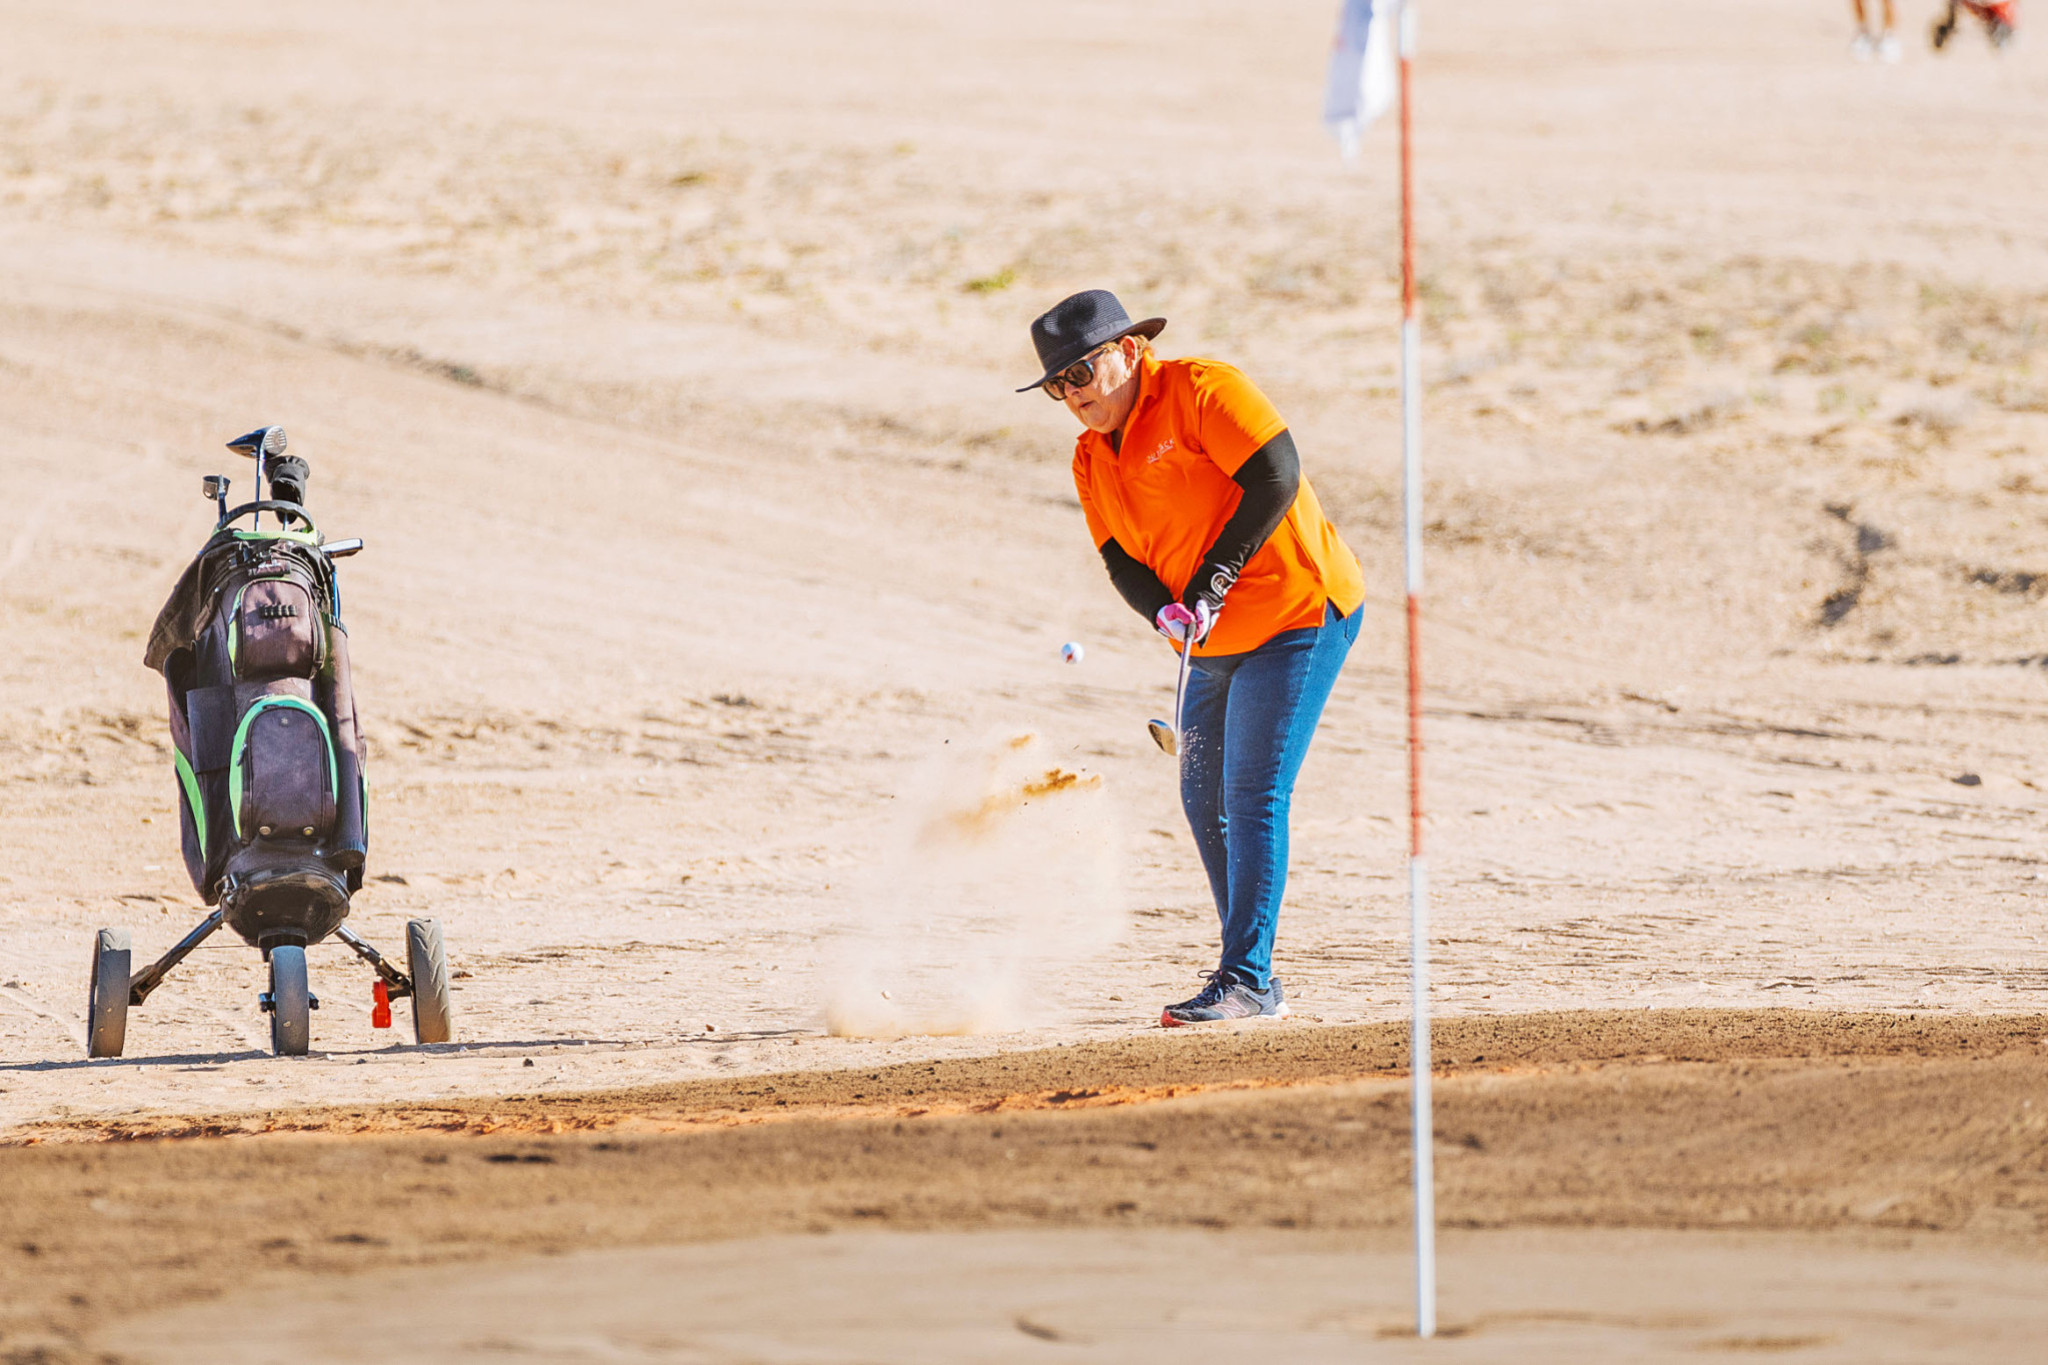 More than 100 golfers will hit the dunes of Birdsville this weekend for the Outback Queensland Masters.